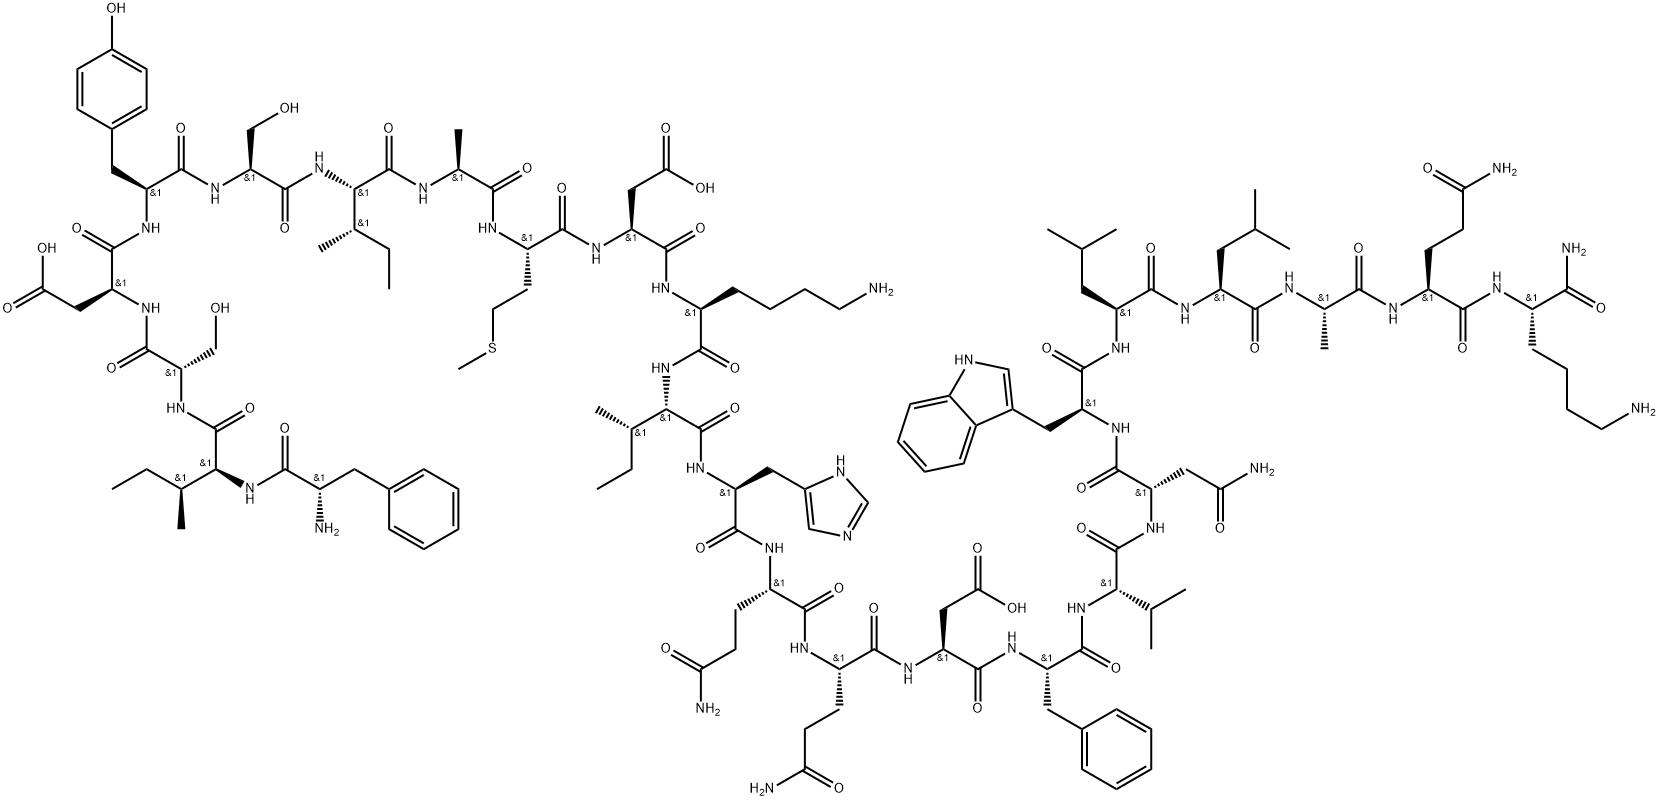 GASTRIC INHIBITORY POLYPEPTIDE (6-30) AMIDE (HUMAN) Structural